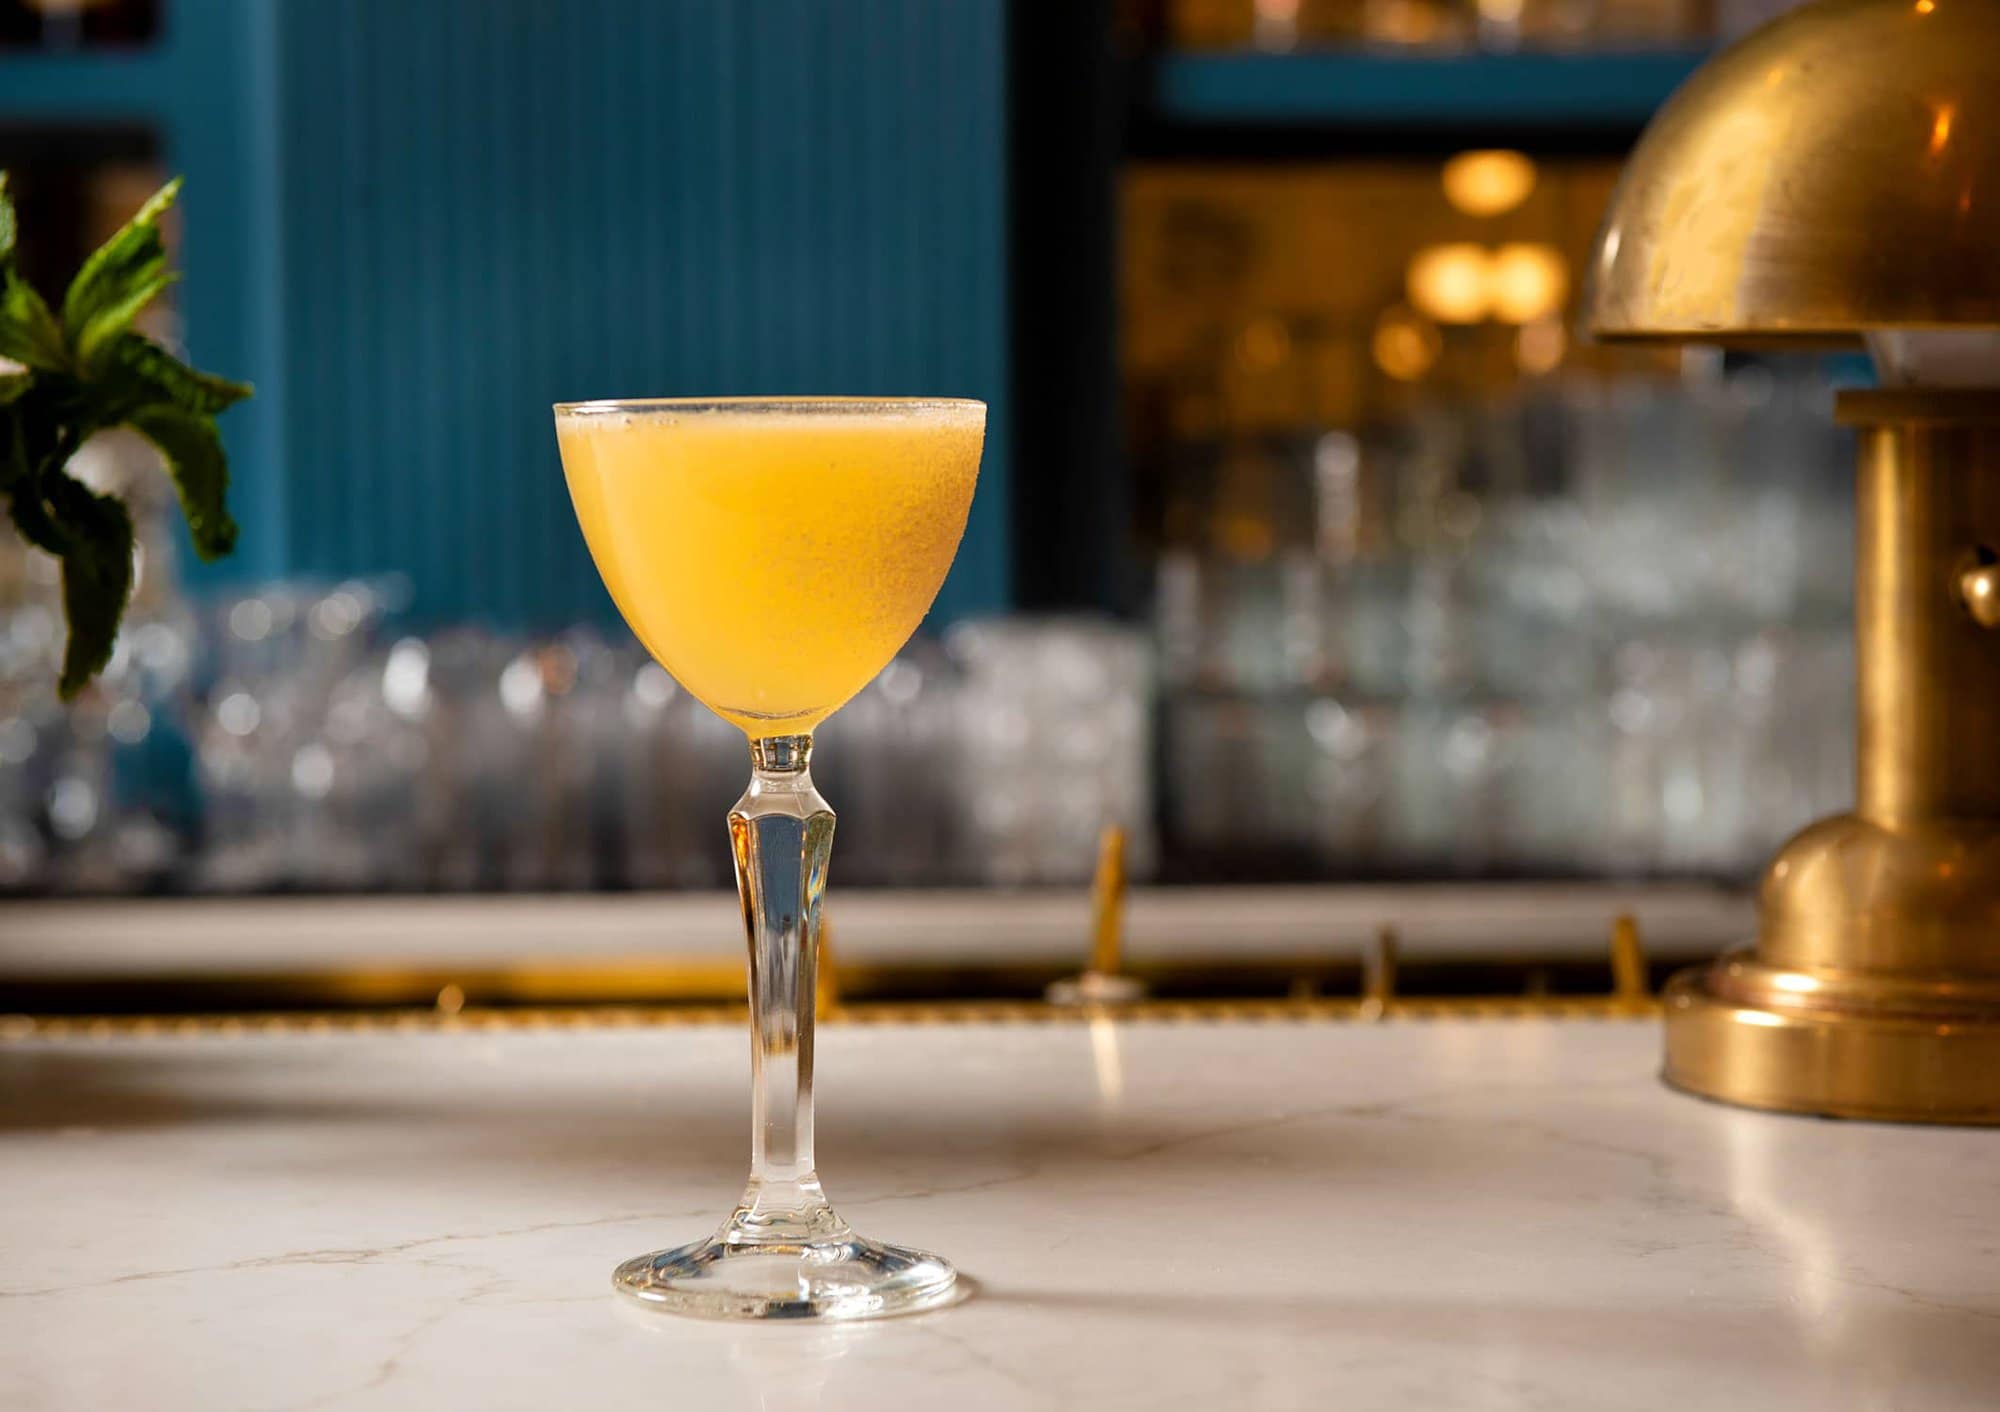 Chamomile-infused tequila cocktail: The Birds and the Bees